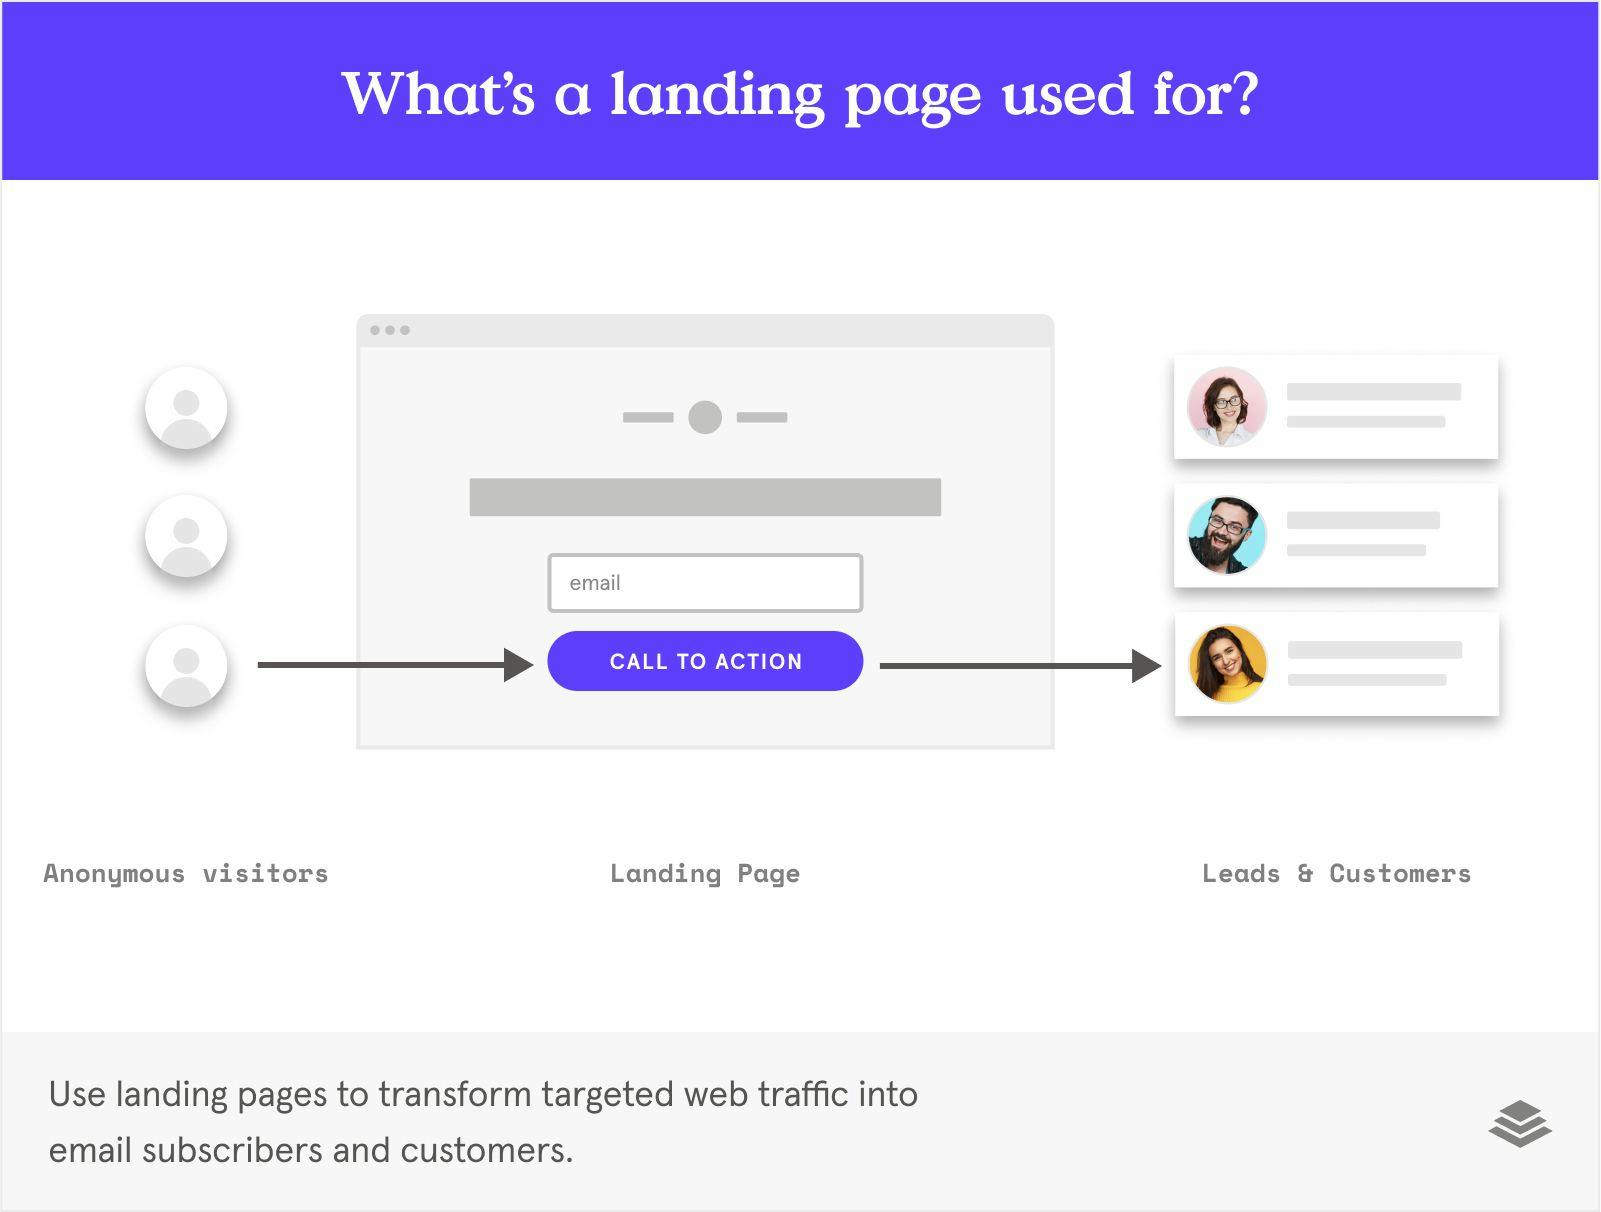 Use landing pages to transform targeted web traffic into email subscribers